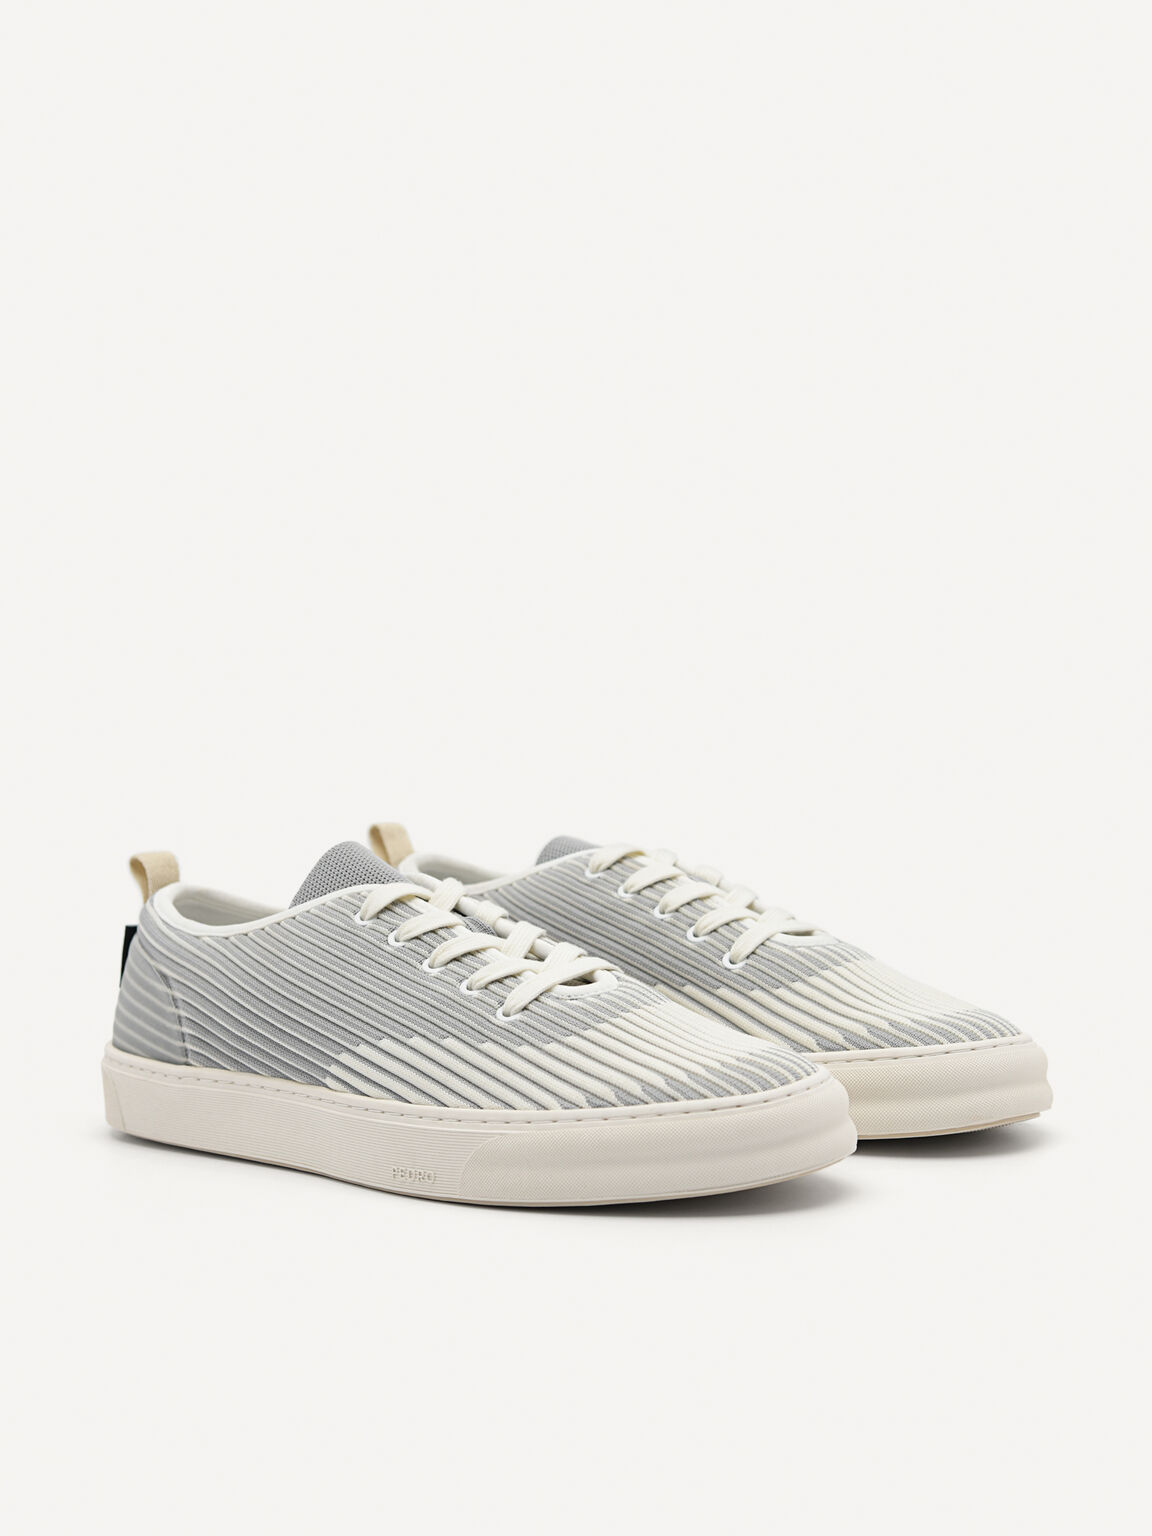 rePEDRO Pleated Court Sneakers, Light Grey